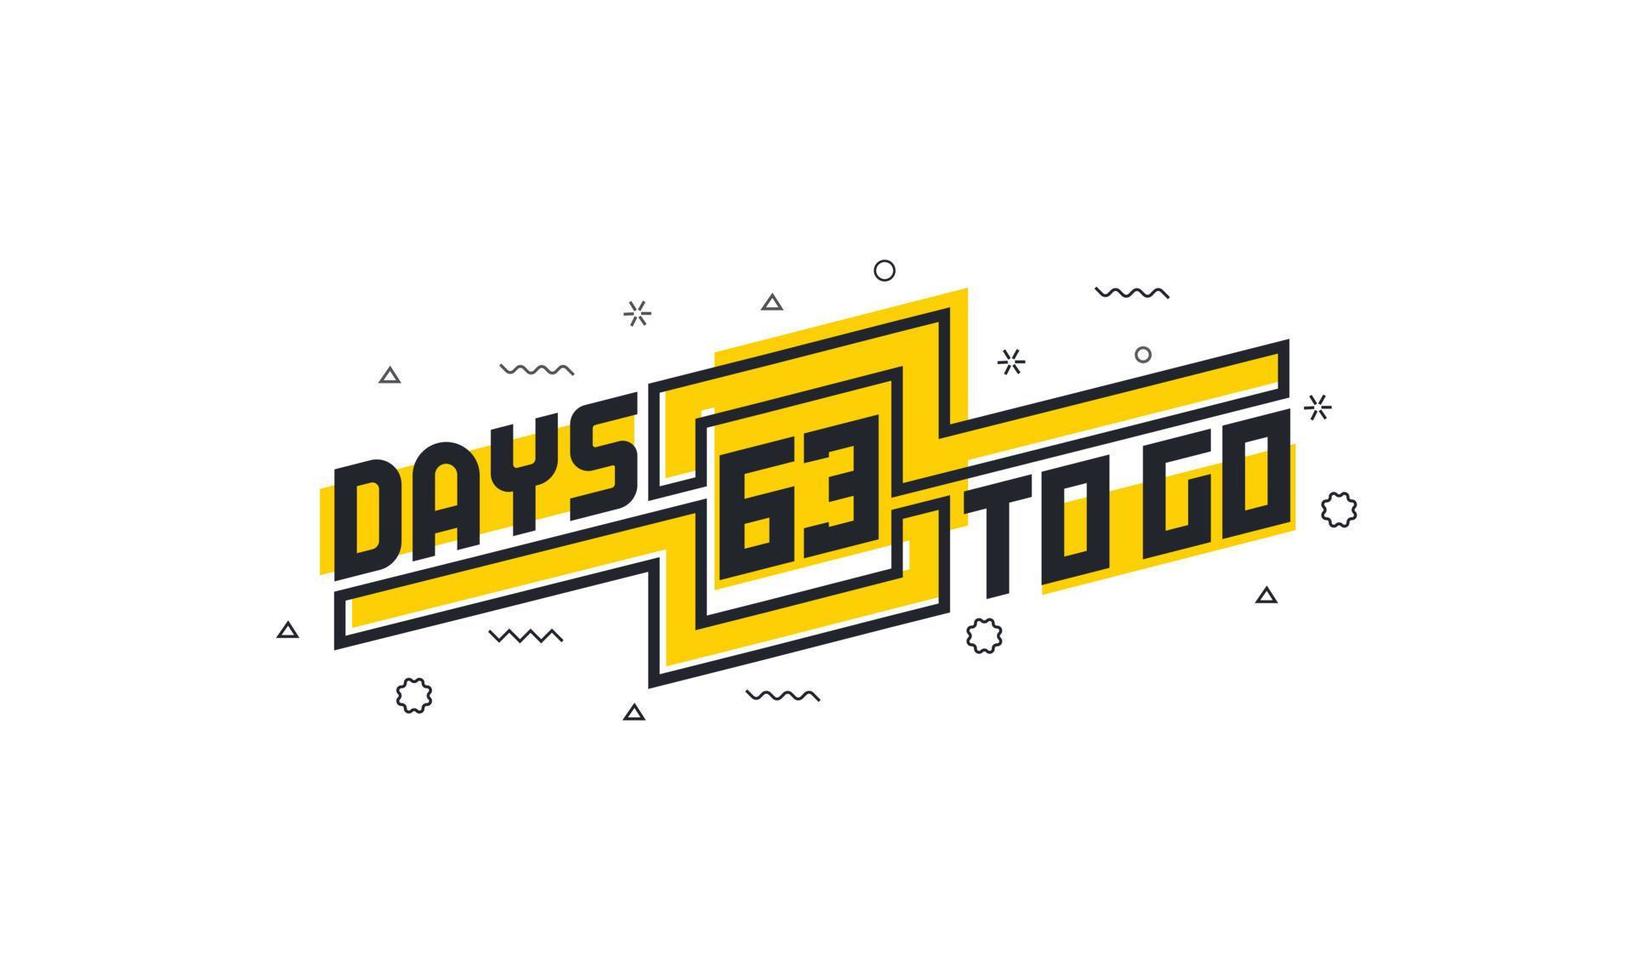 63 days to go countdown sign for sale or promotion. vector